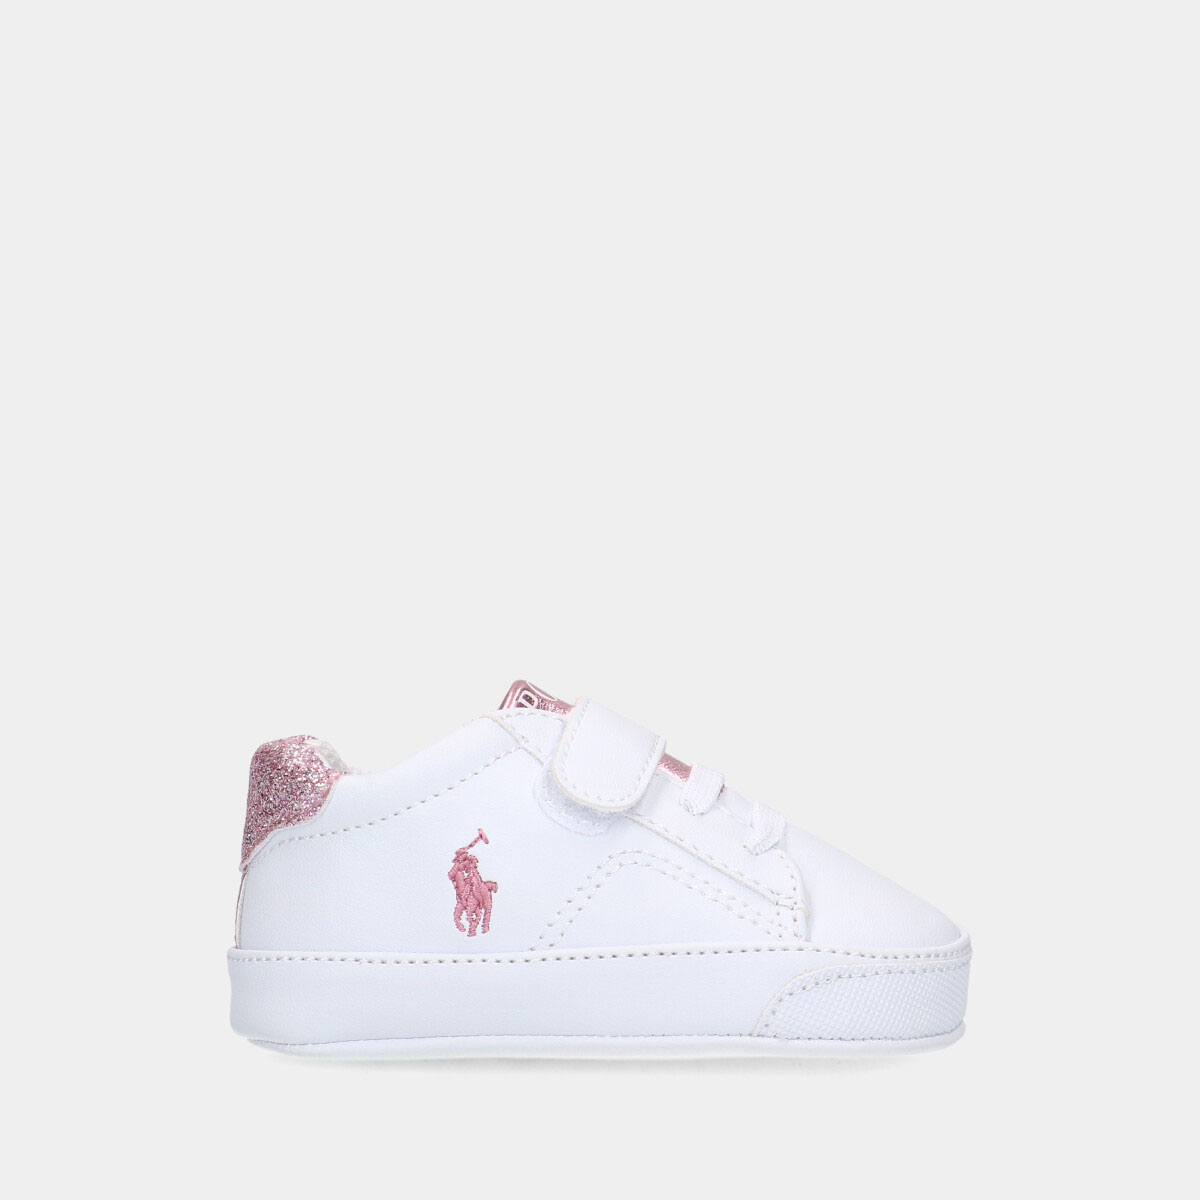 Polo Ralph Lauren Theron V Ps Layette White / Pink Glitter baby sneakers
